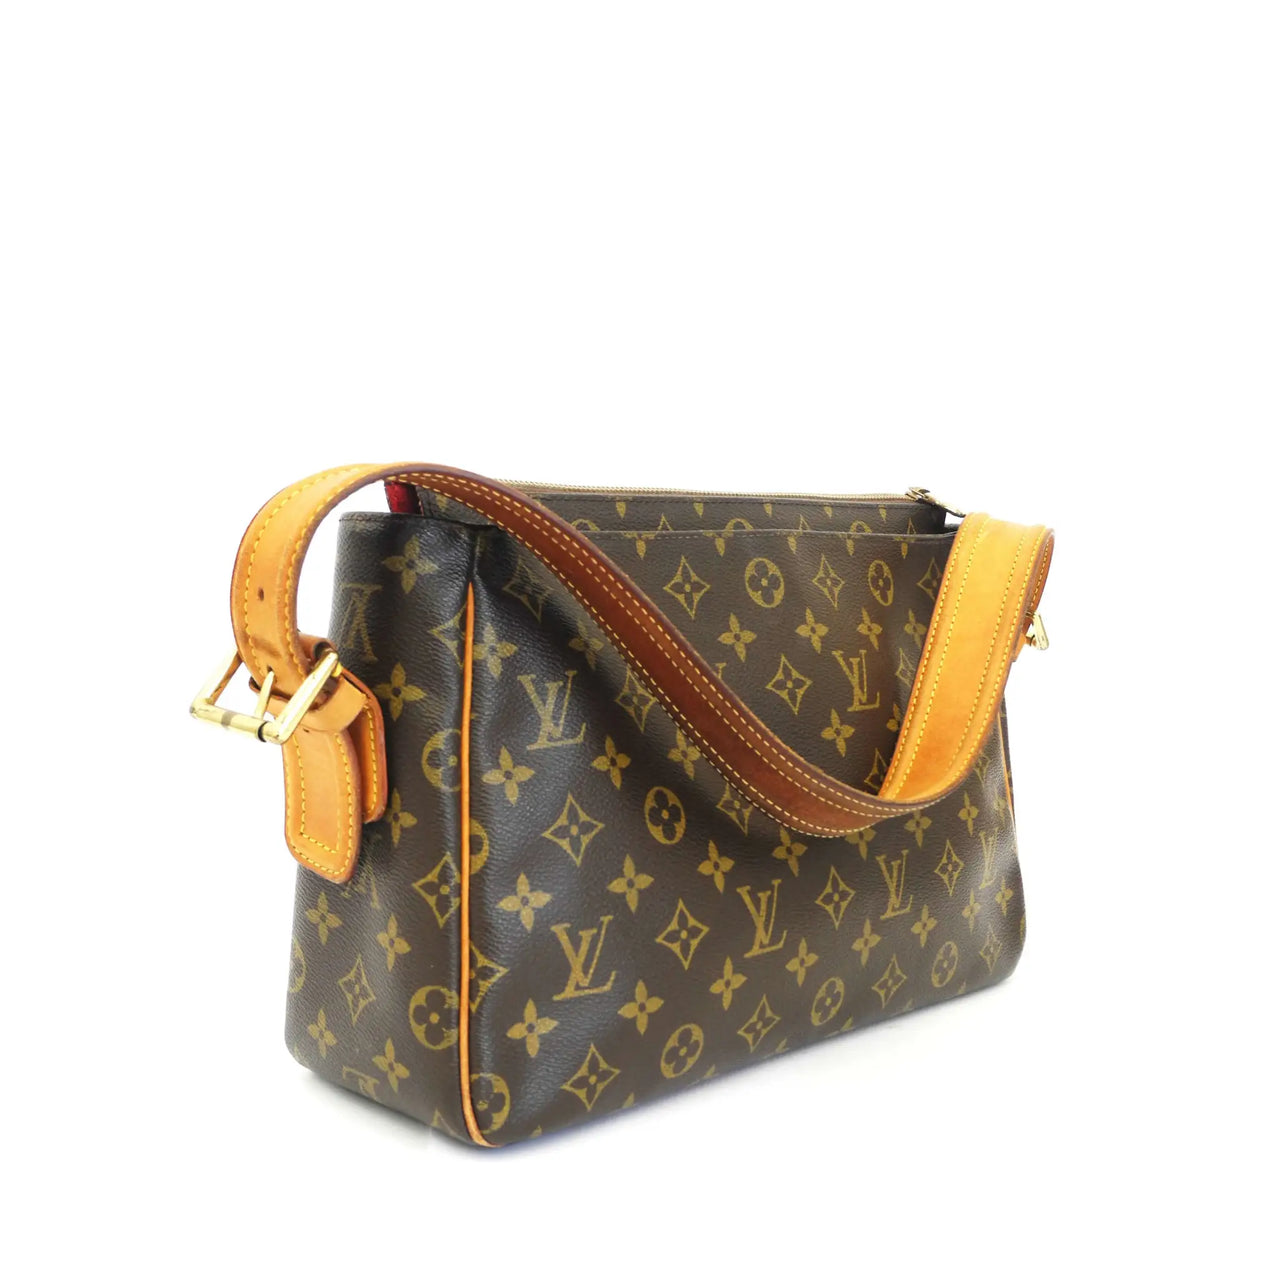 Shop for Louis Vuitton Monogram Canvas Leather Cite GM Shoulder Bag -  Shipped from USA